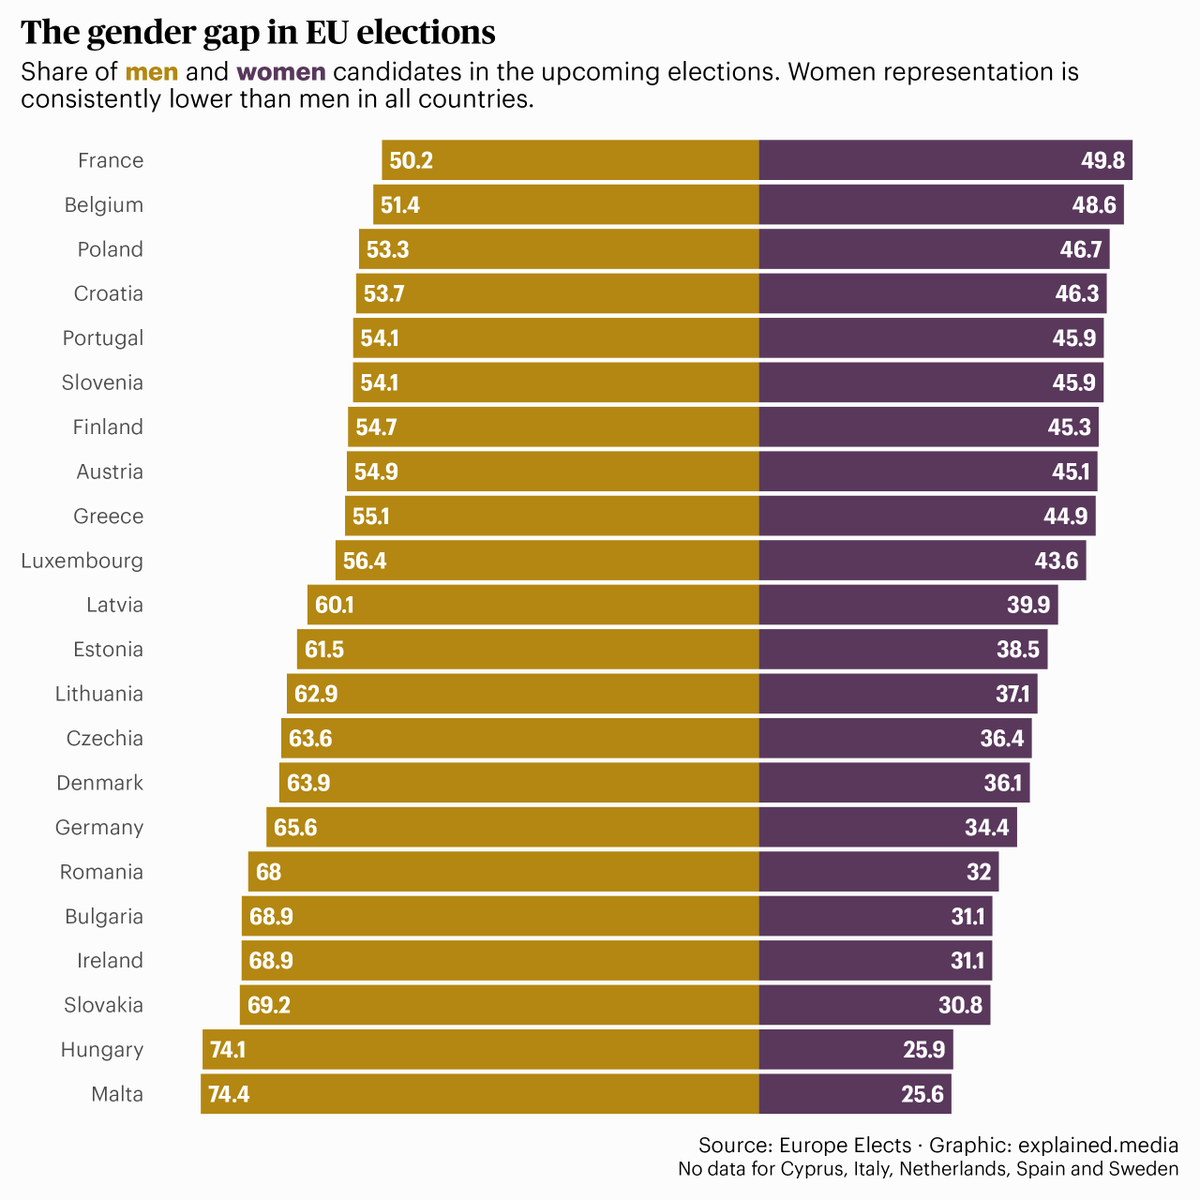 Women candidates are underrepresented in all countries in the upcoming EU elections

Source: @EuropeElects

#dataviz #datajournalism #elections #EU